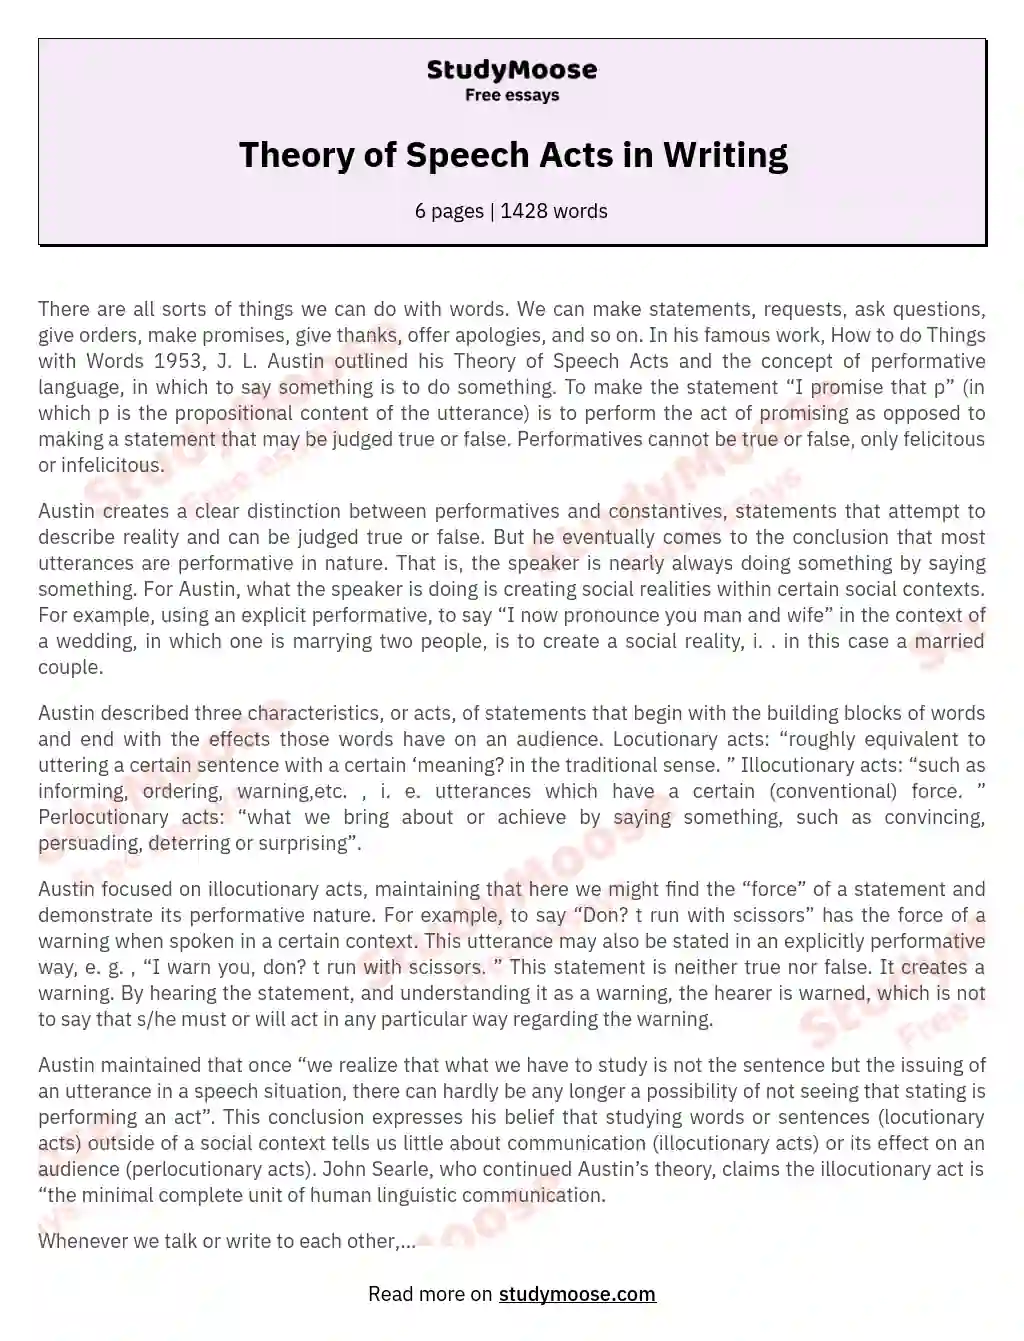 Theory of Speech Acts in Writing essay